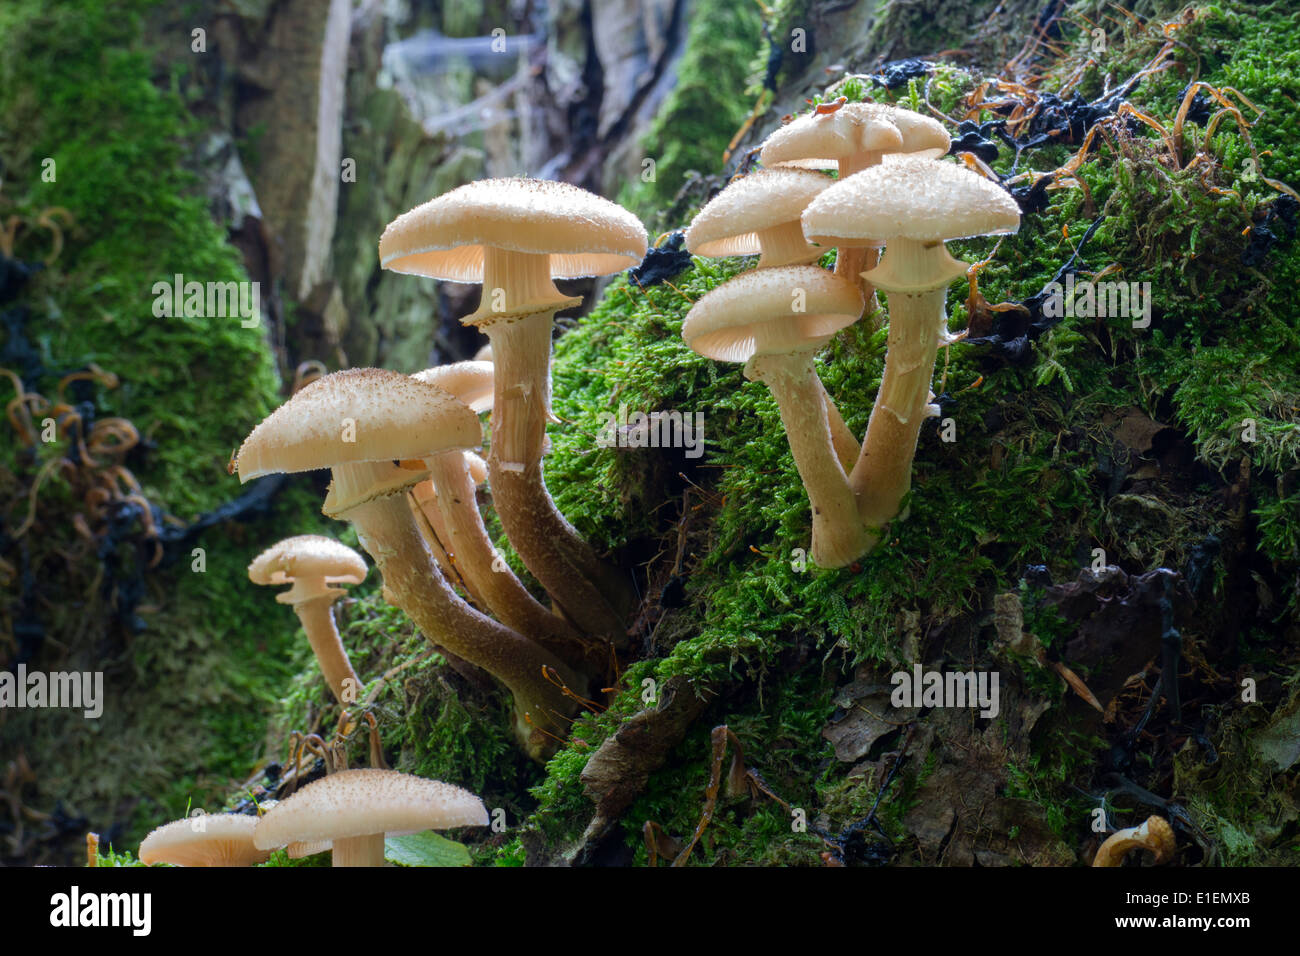 Fruiting Bodies of the Armillaria sp of Fungi Growing from a Moss Covered Tree Stump UK Stock Photo